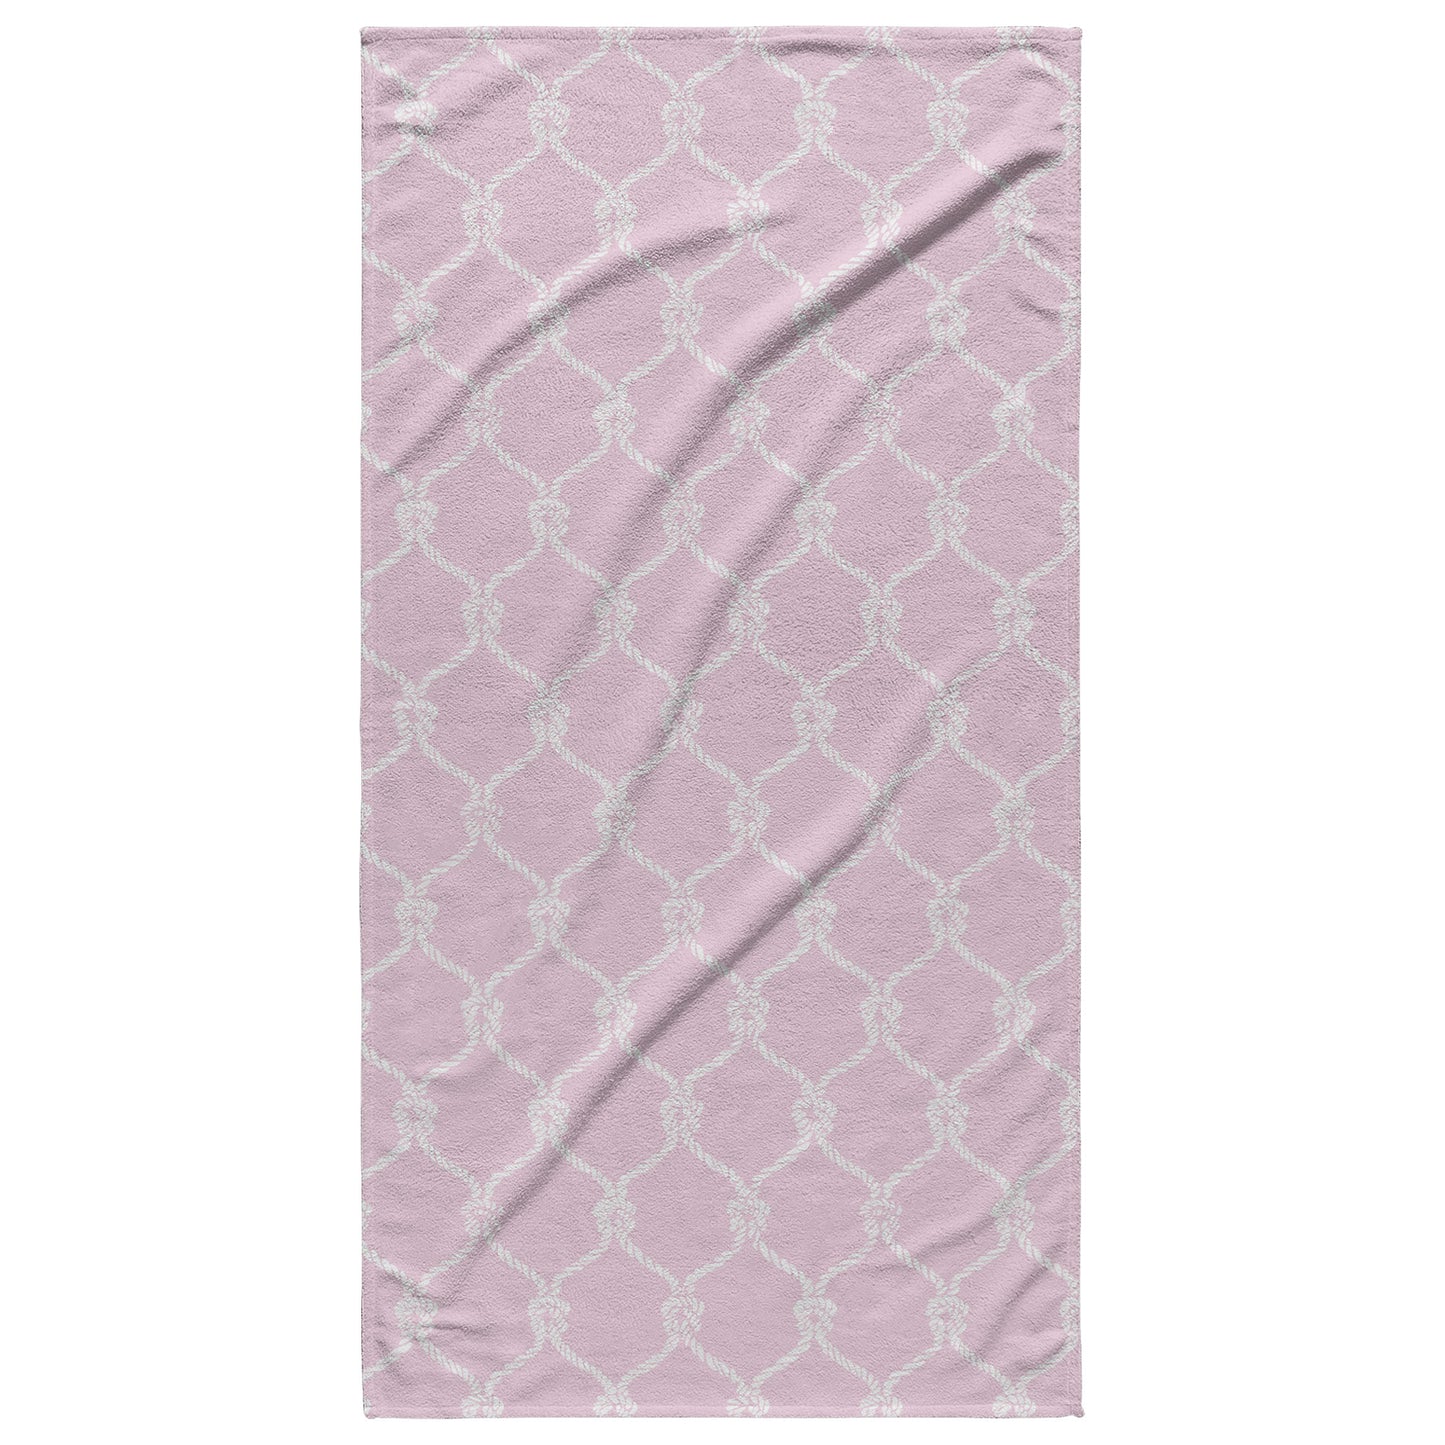 Nautical Netting Sketches on Pink Background, Beach Towel